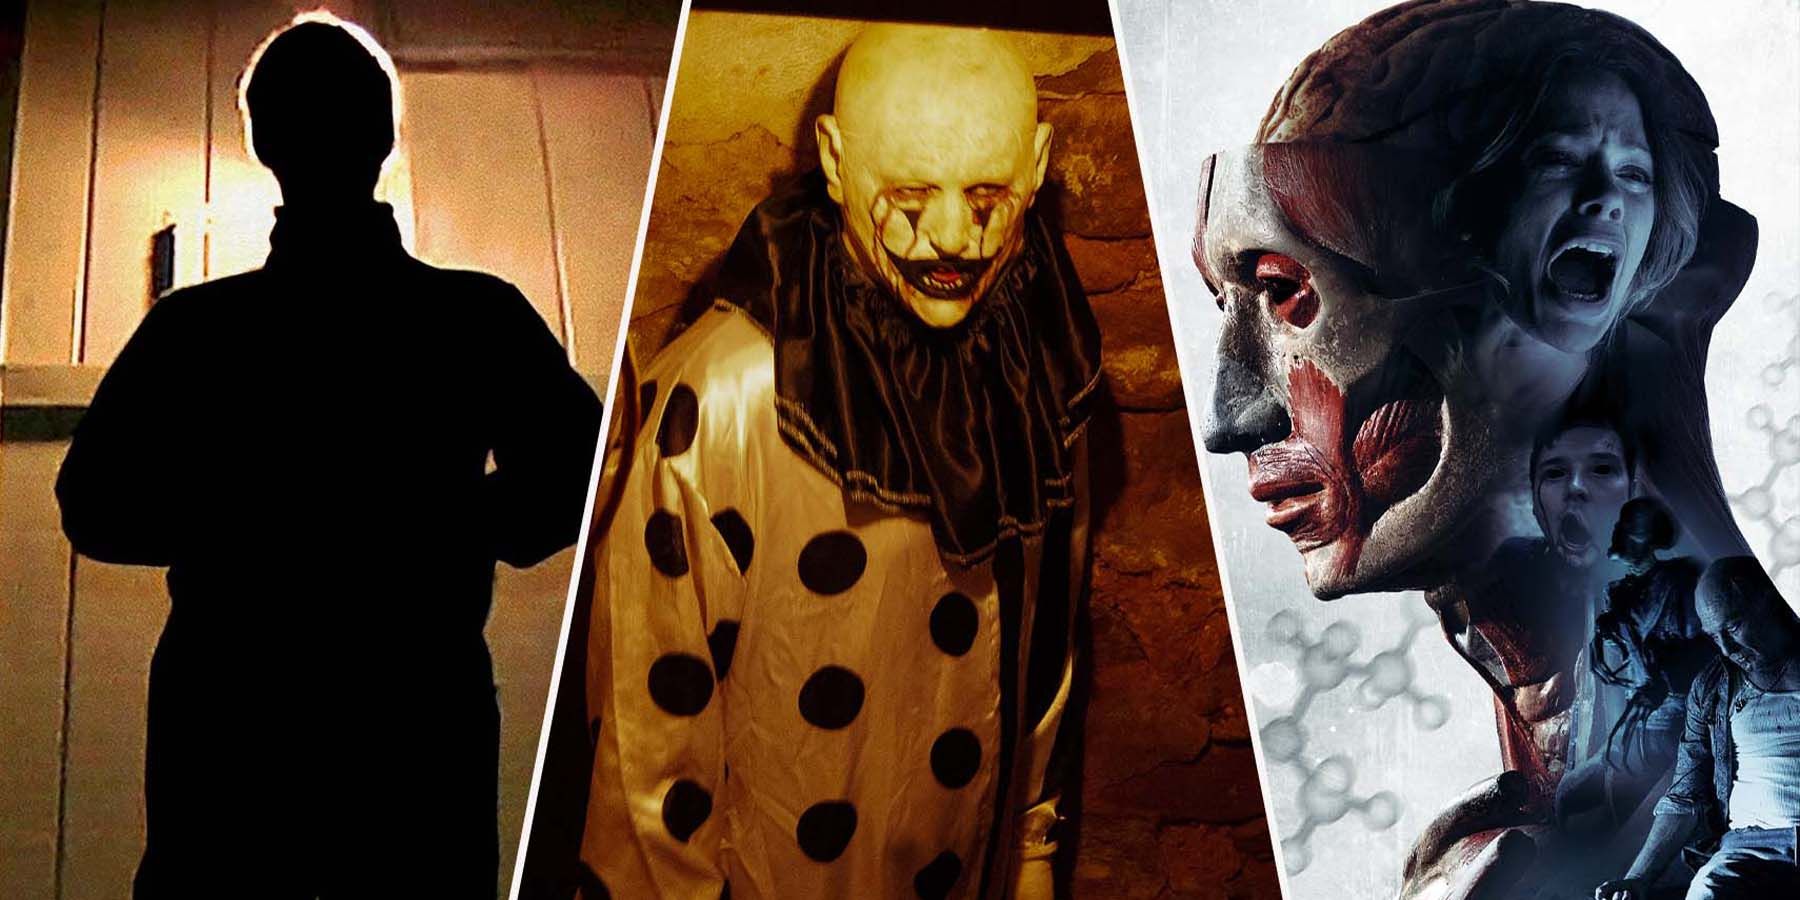 8 Obscure Horror Movies That Are Downright Scary (& Where To Stream Them) featured image